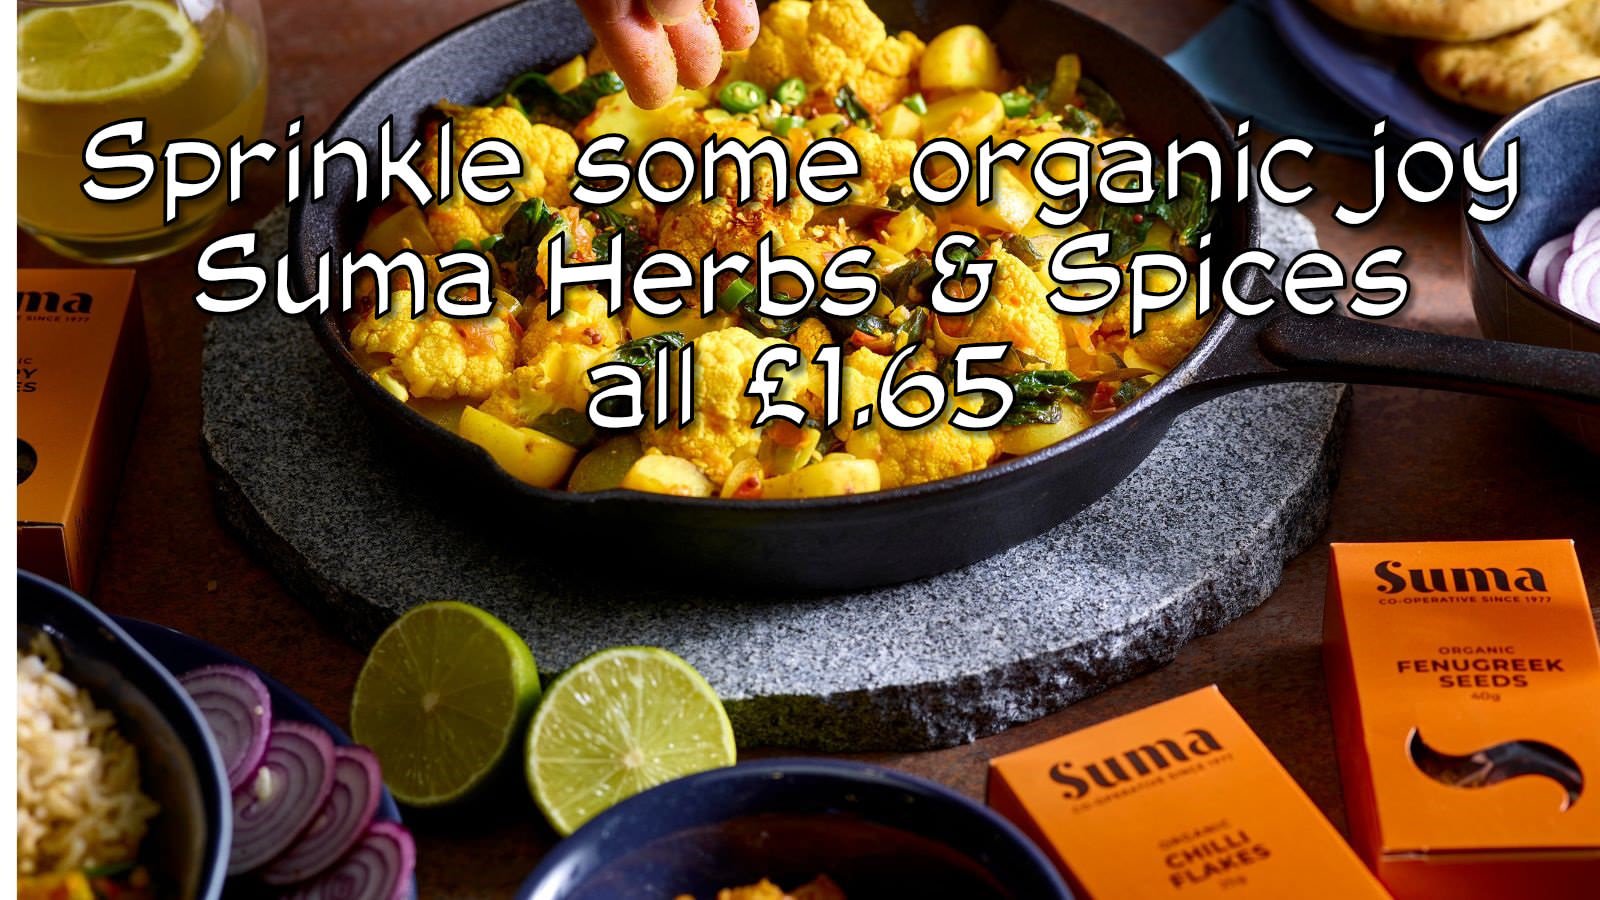 Twitter image organic herbs and spices.jpg